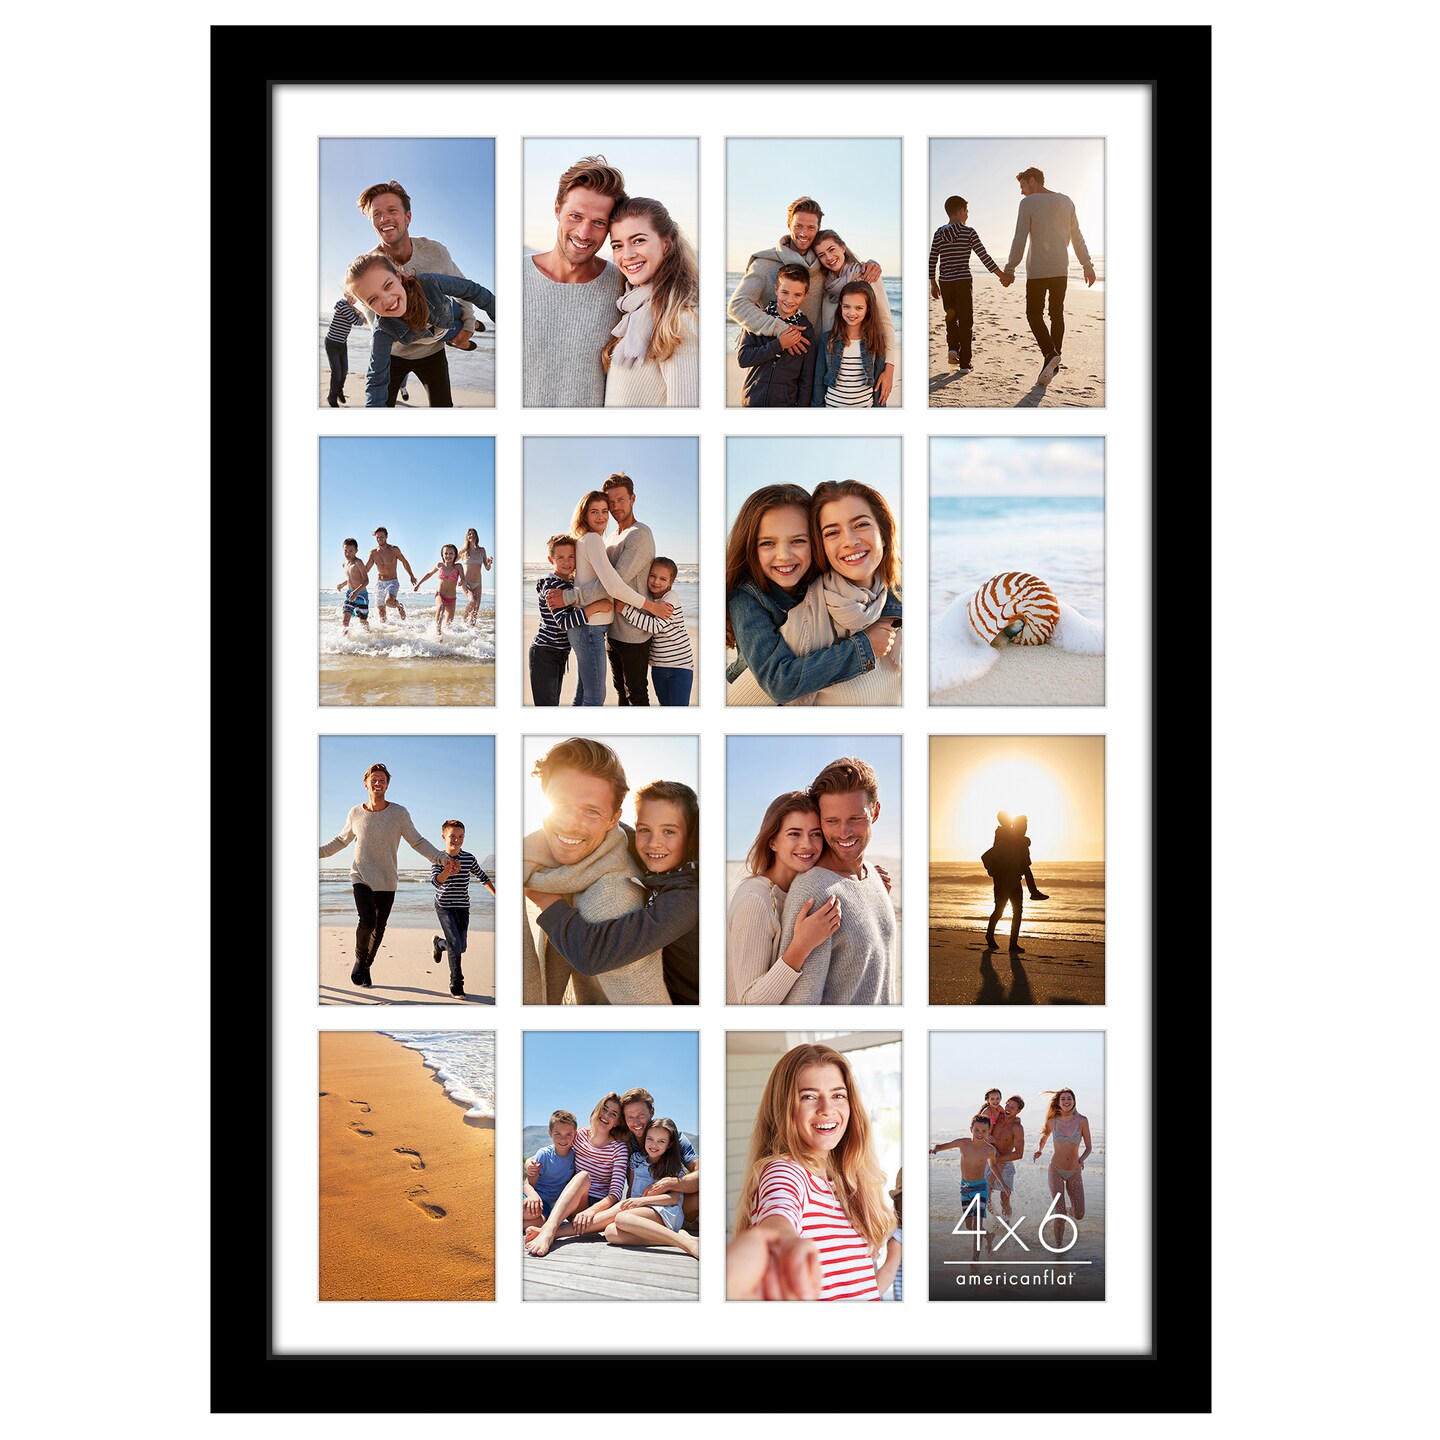 Americanflat 18x26 Collage Picture Frame - Use as Sixteen 4x6 Picture Frame Openings or One 18x26 Photo Frame Made of Engineered Wood with Polished Plexiglass